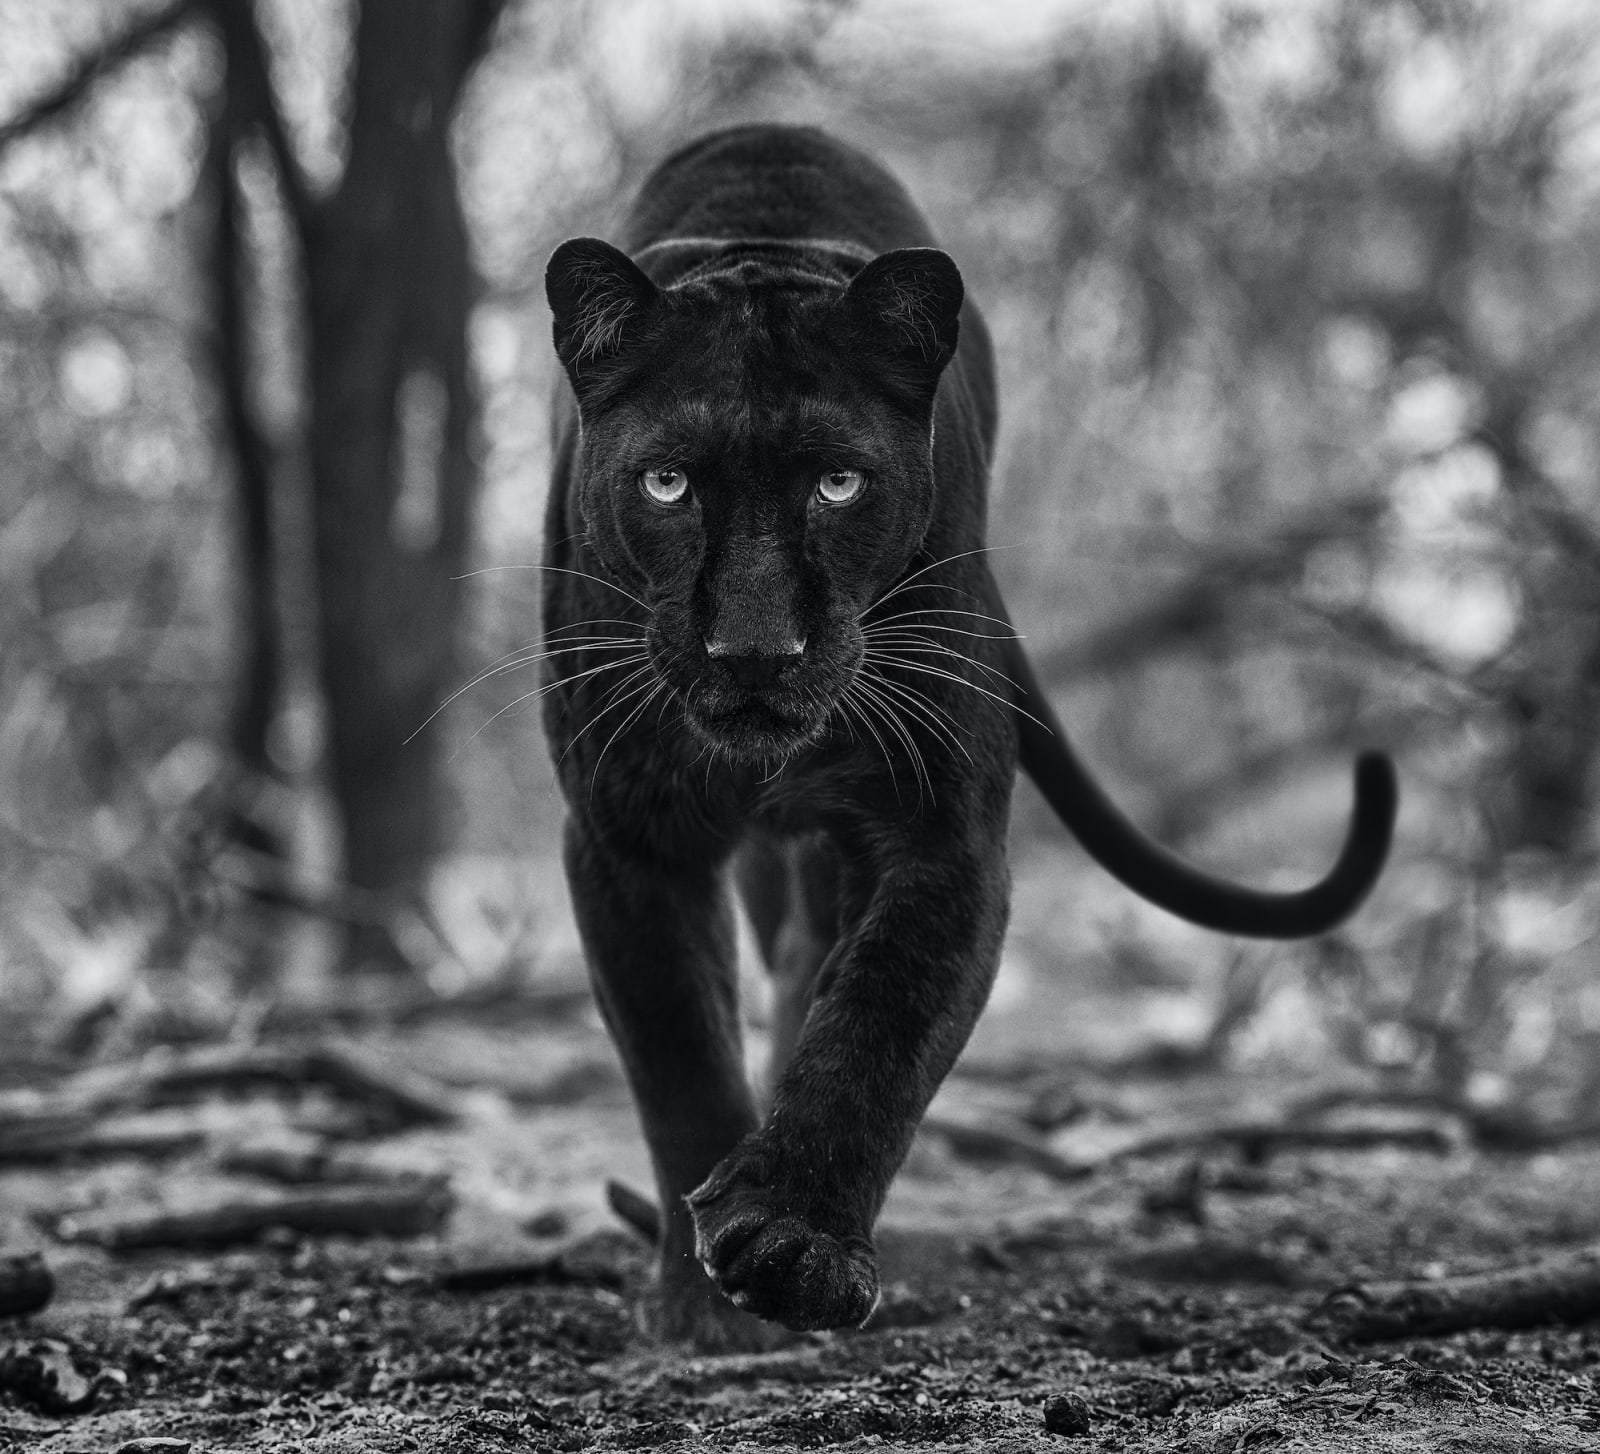 David Yarrow, Remains of The Day, 2021 | Casterline|Goodman Gallery